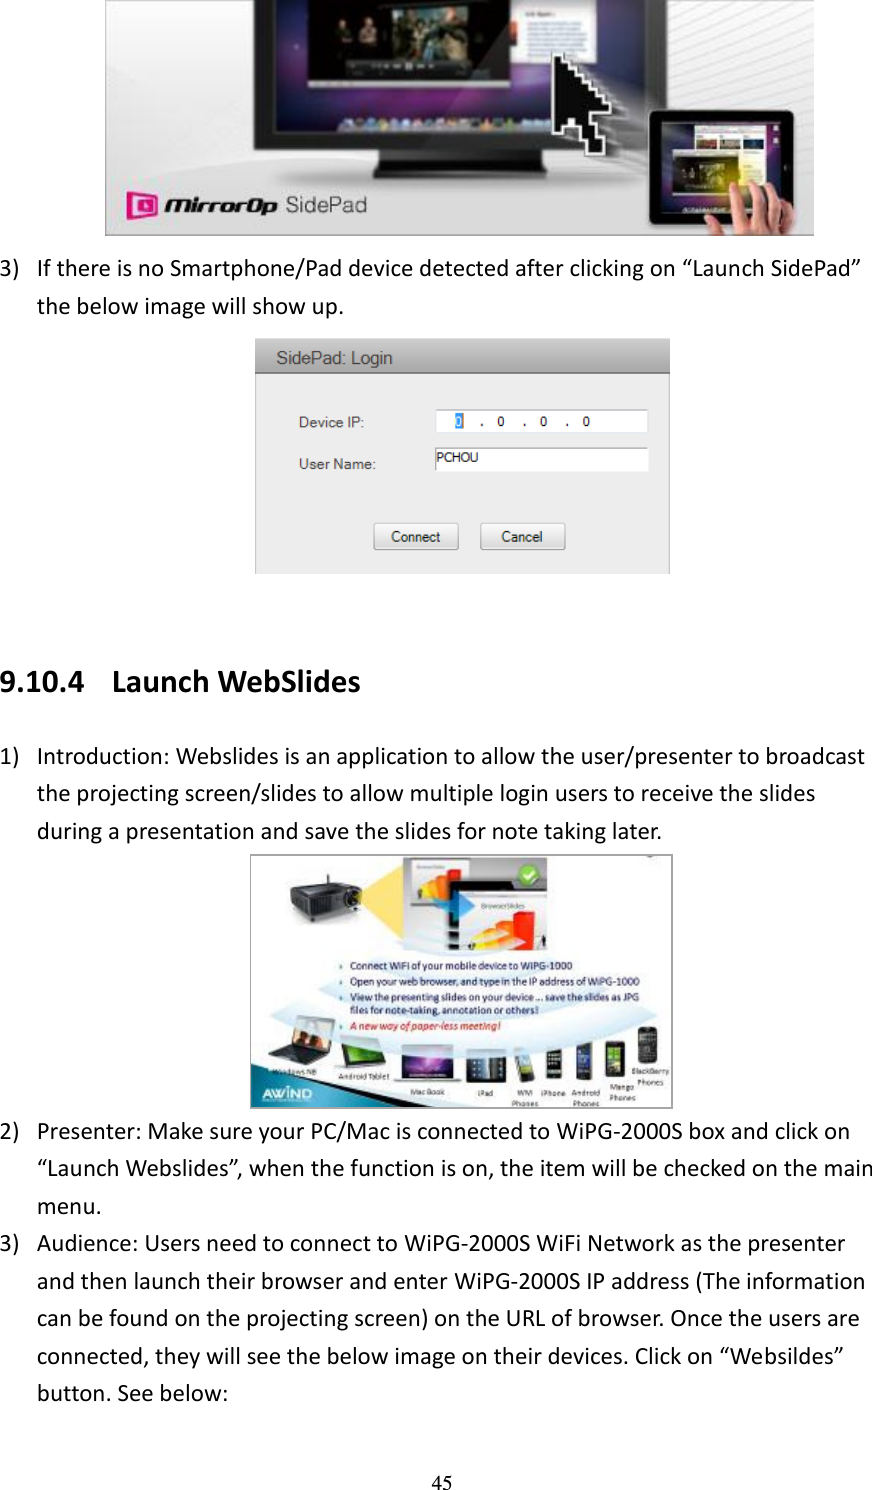   45  3) If there is no Smartphone/Pad device detected after clicking on “Launch SidePad” the below image will show up.     9.10.4 Launch WebSlides 1) Introduction: Webslides is an application to allow the user/presenter to broadcast the projecting screen/slides to allow multiple login users to receive the slides during a presentation and save the slides for note taking later.    2) Presenter: Make sure your PC/Mac is connected to WiPG-2000S box and click on “Launch Webslides”, when the function is on, the item will be checked on the main menu.   3) Audience: Users need to connect to WiPG-2000S WiFi Network as the presenter and then launch their browser and enter WiPG-2000S IP address (The information can be found on the projecting screen) on the URL of browser. Once the users are connected, they will see the below image on their devices. Click on “Websildes”   button. See below: 